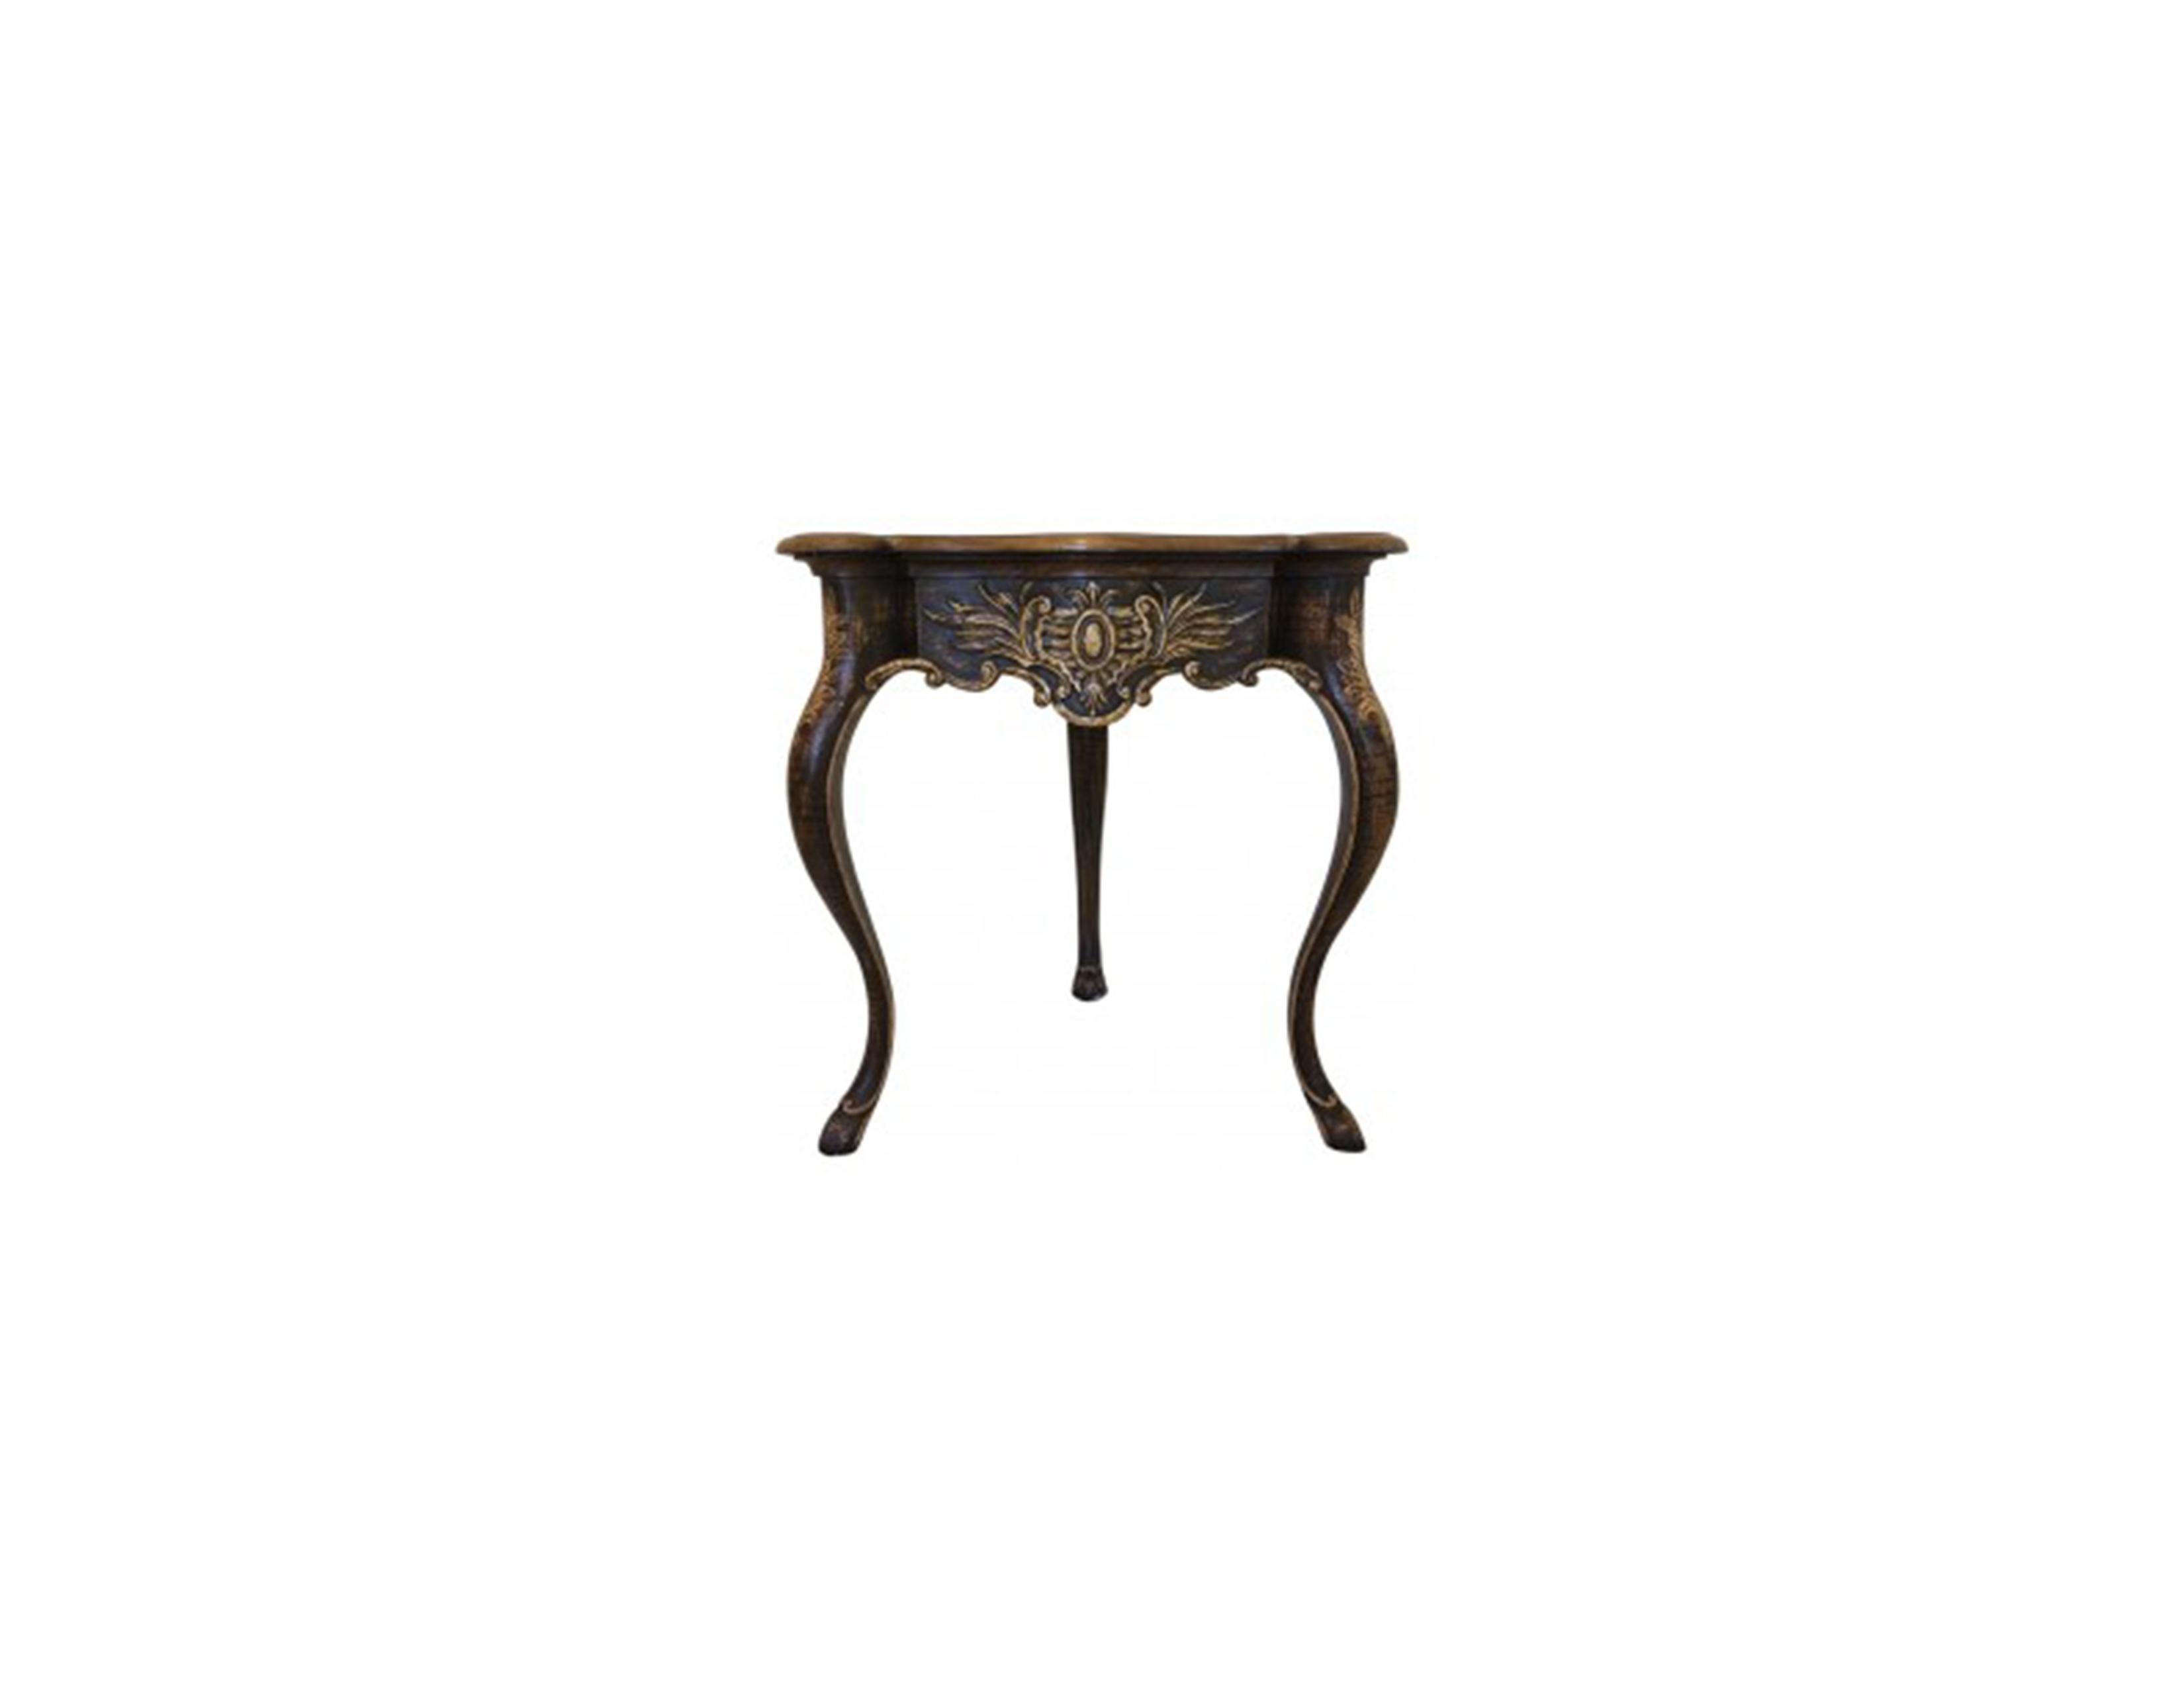 Two highly carved, Baroque style rectangular corner tables with cabriole legs. Apron with a carved cartouche and foliate detail. Finished with a slightly rubbed treatment on the legs for added appearance of age.